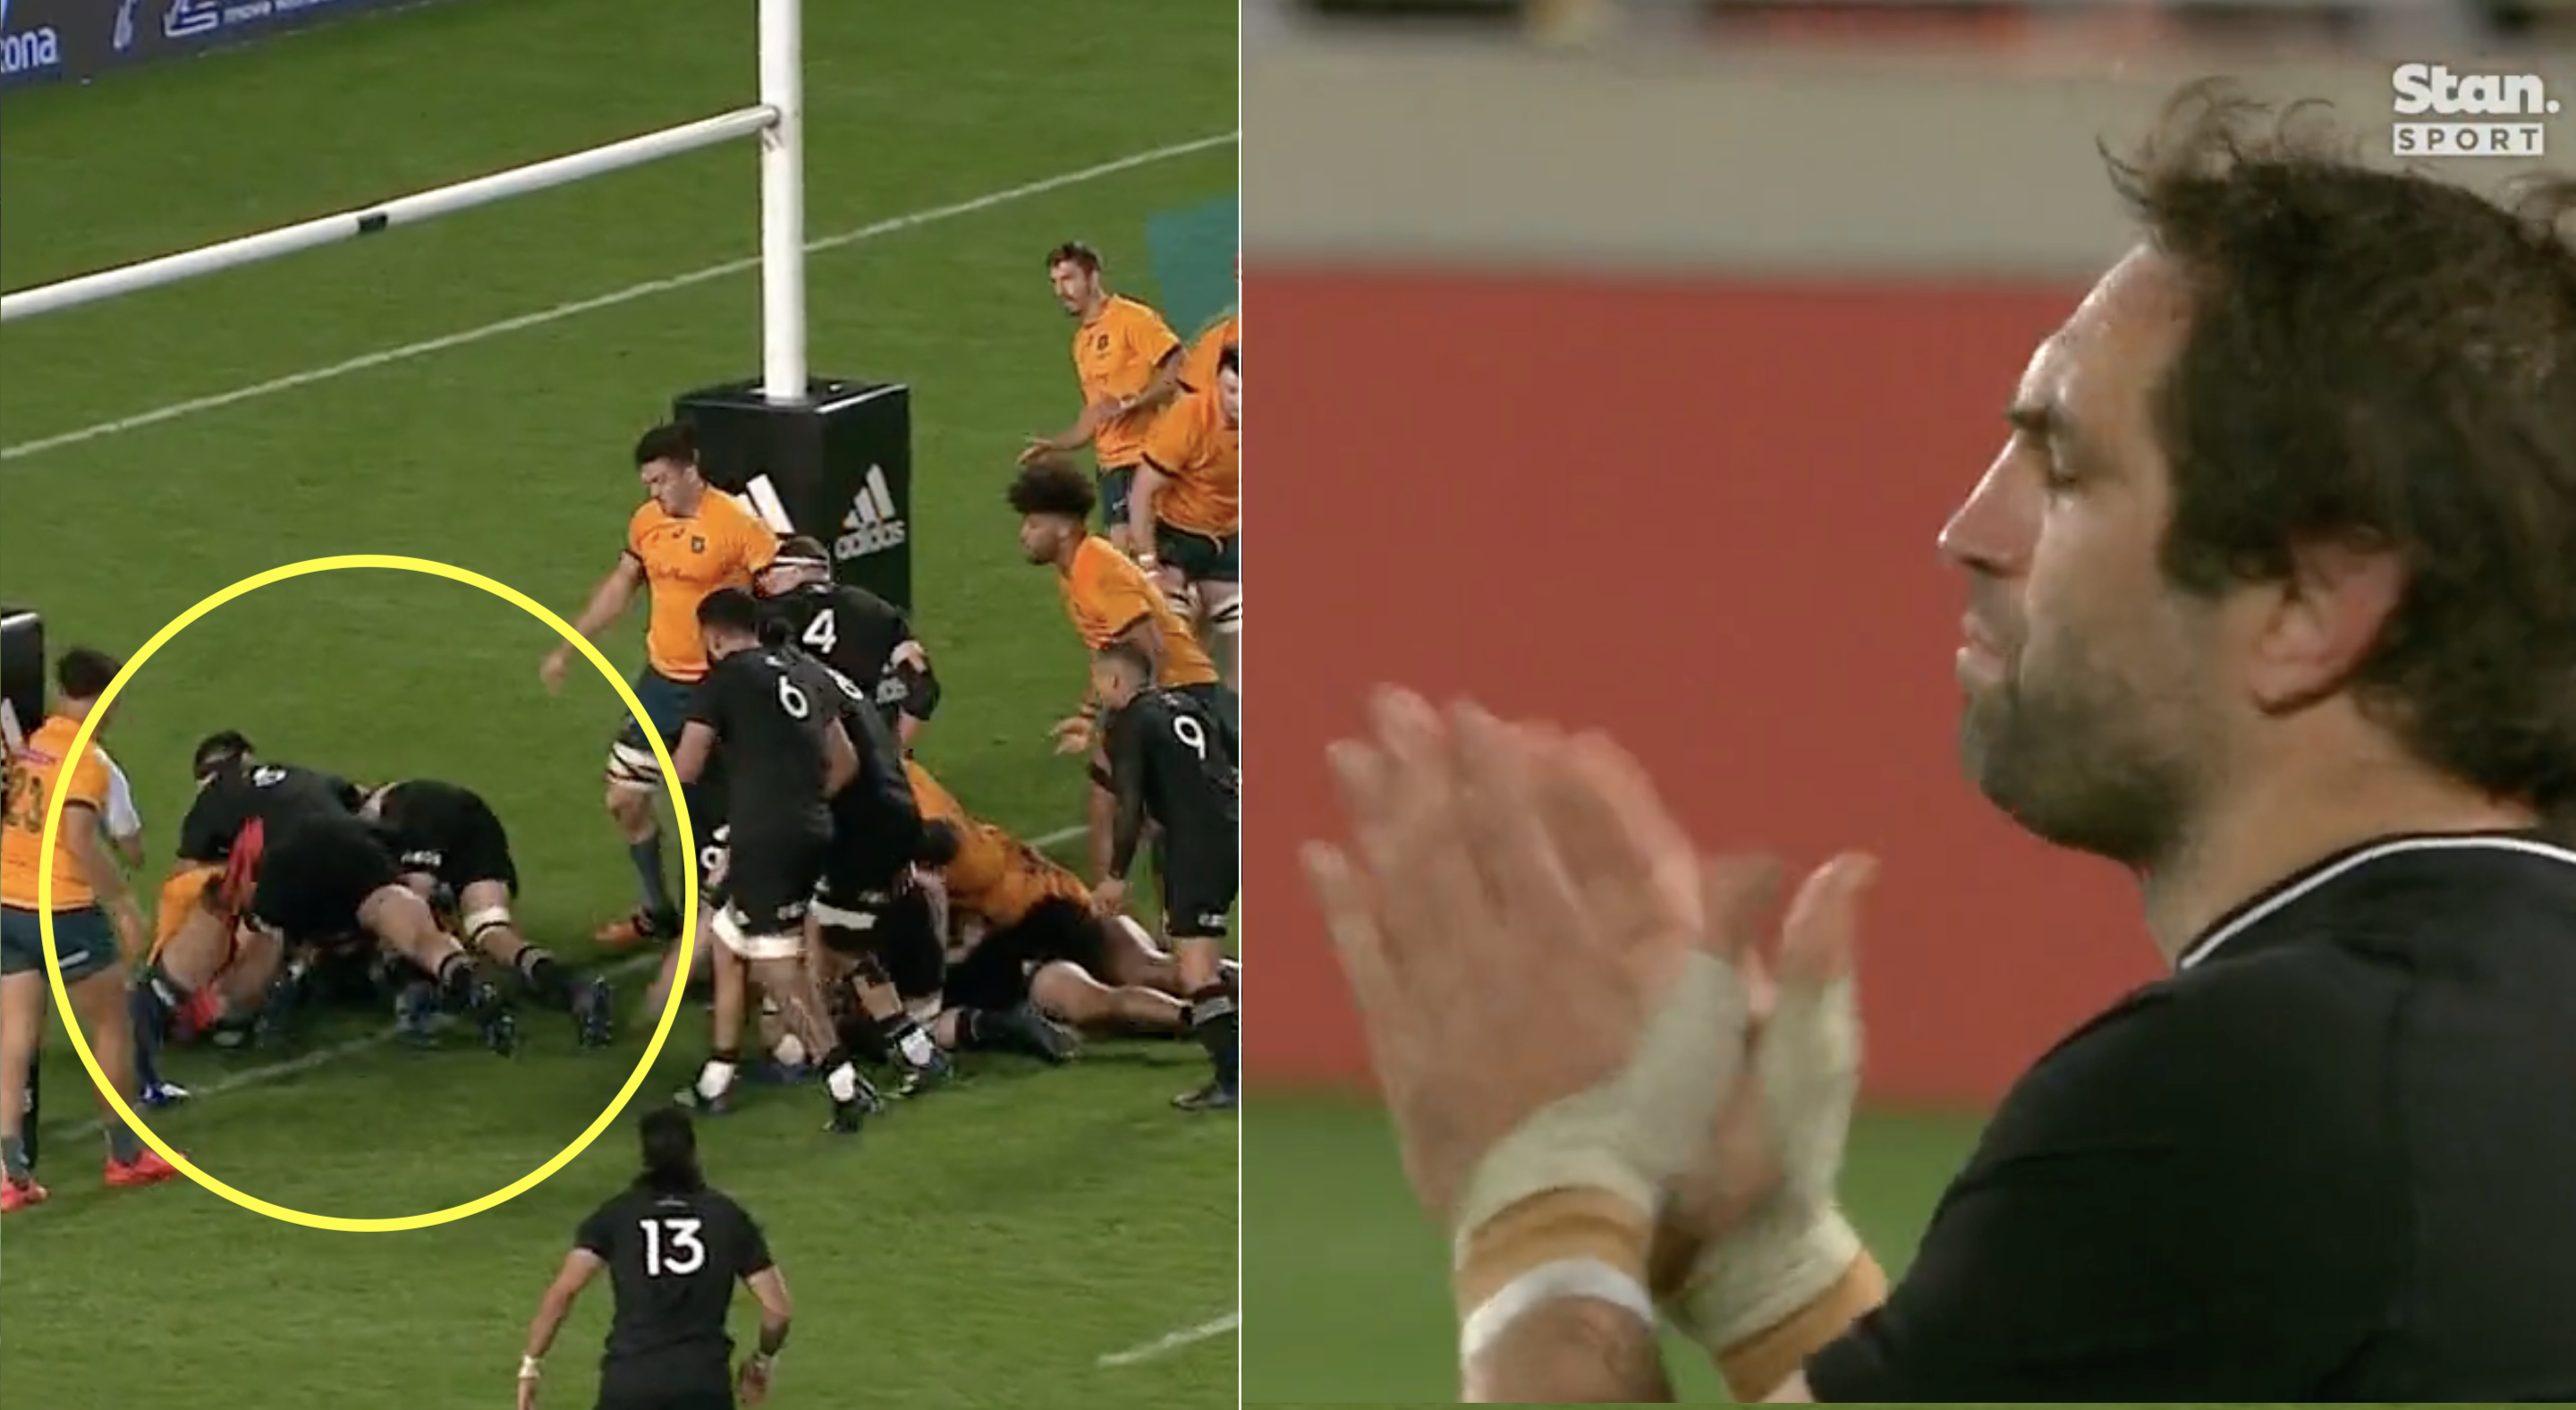 Sam Whitelock quietly produces the greatest finish of all time